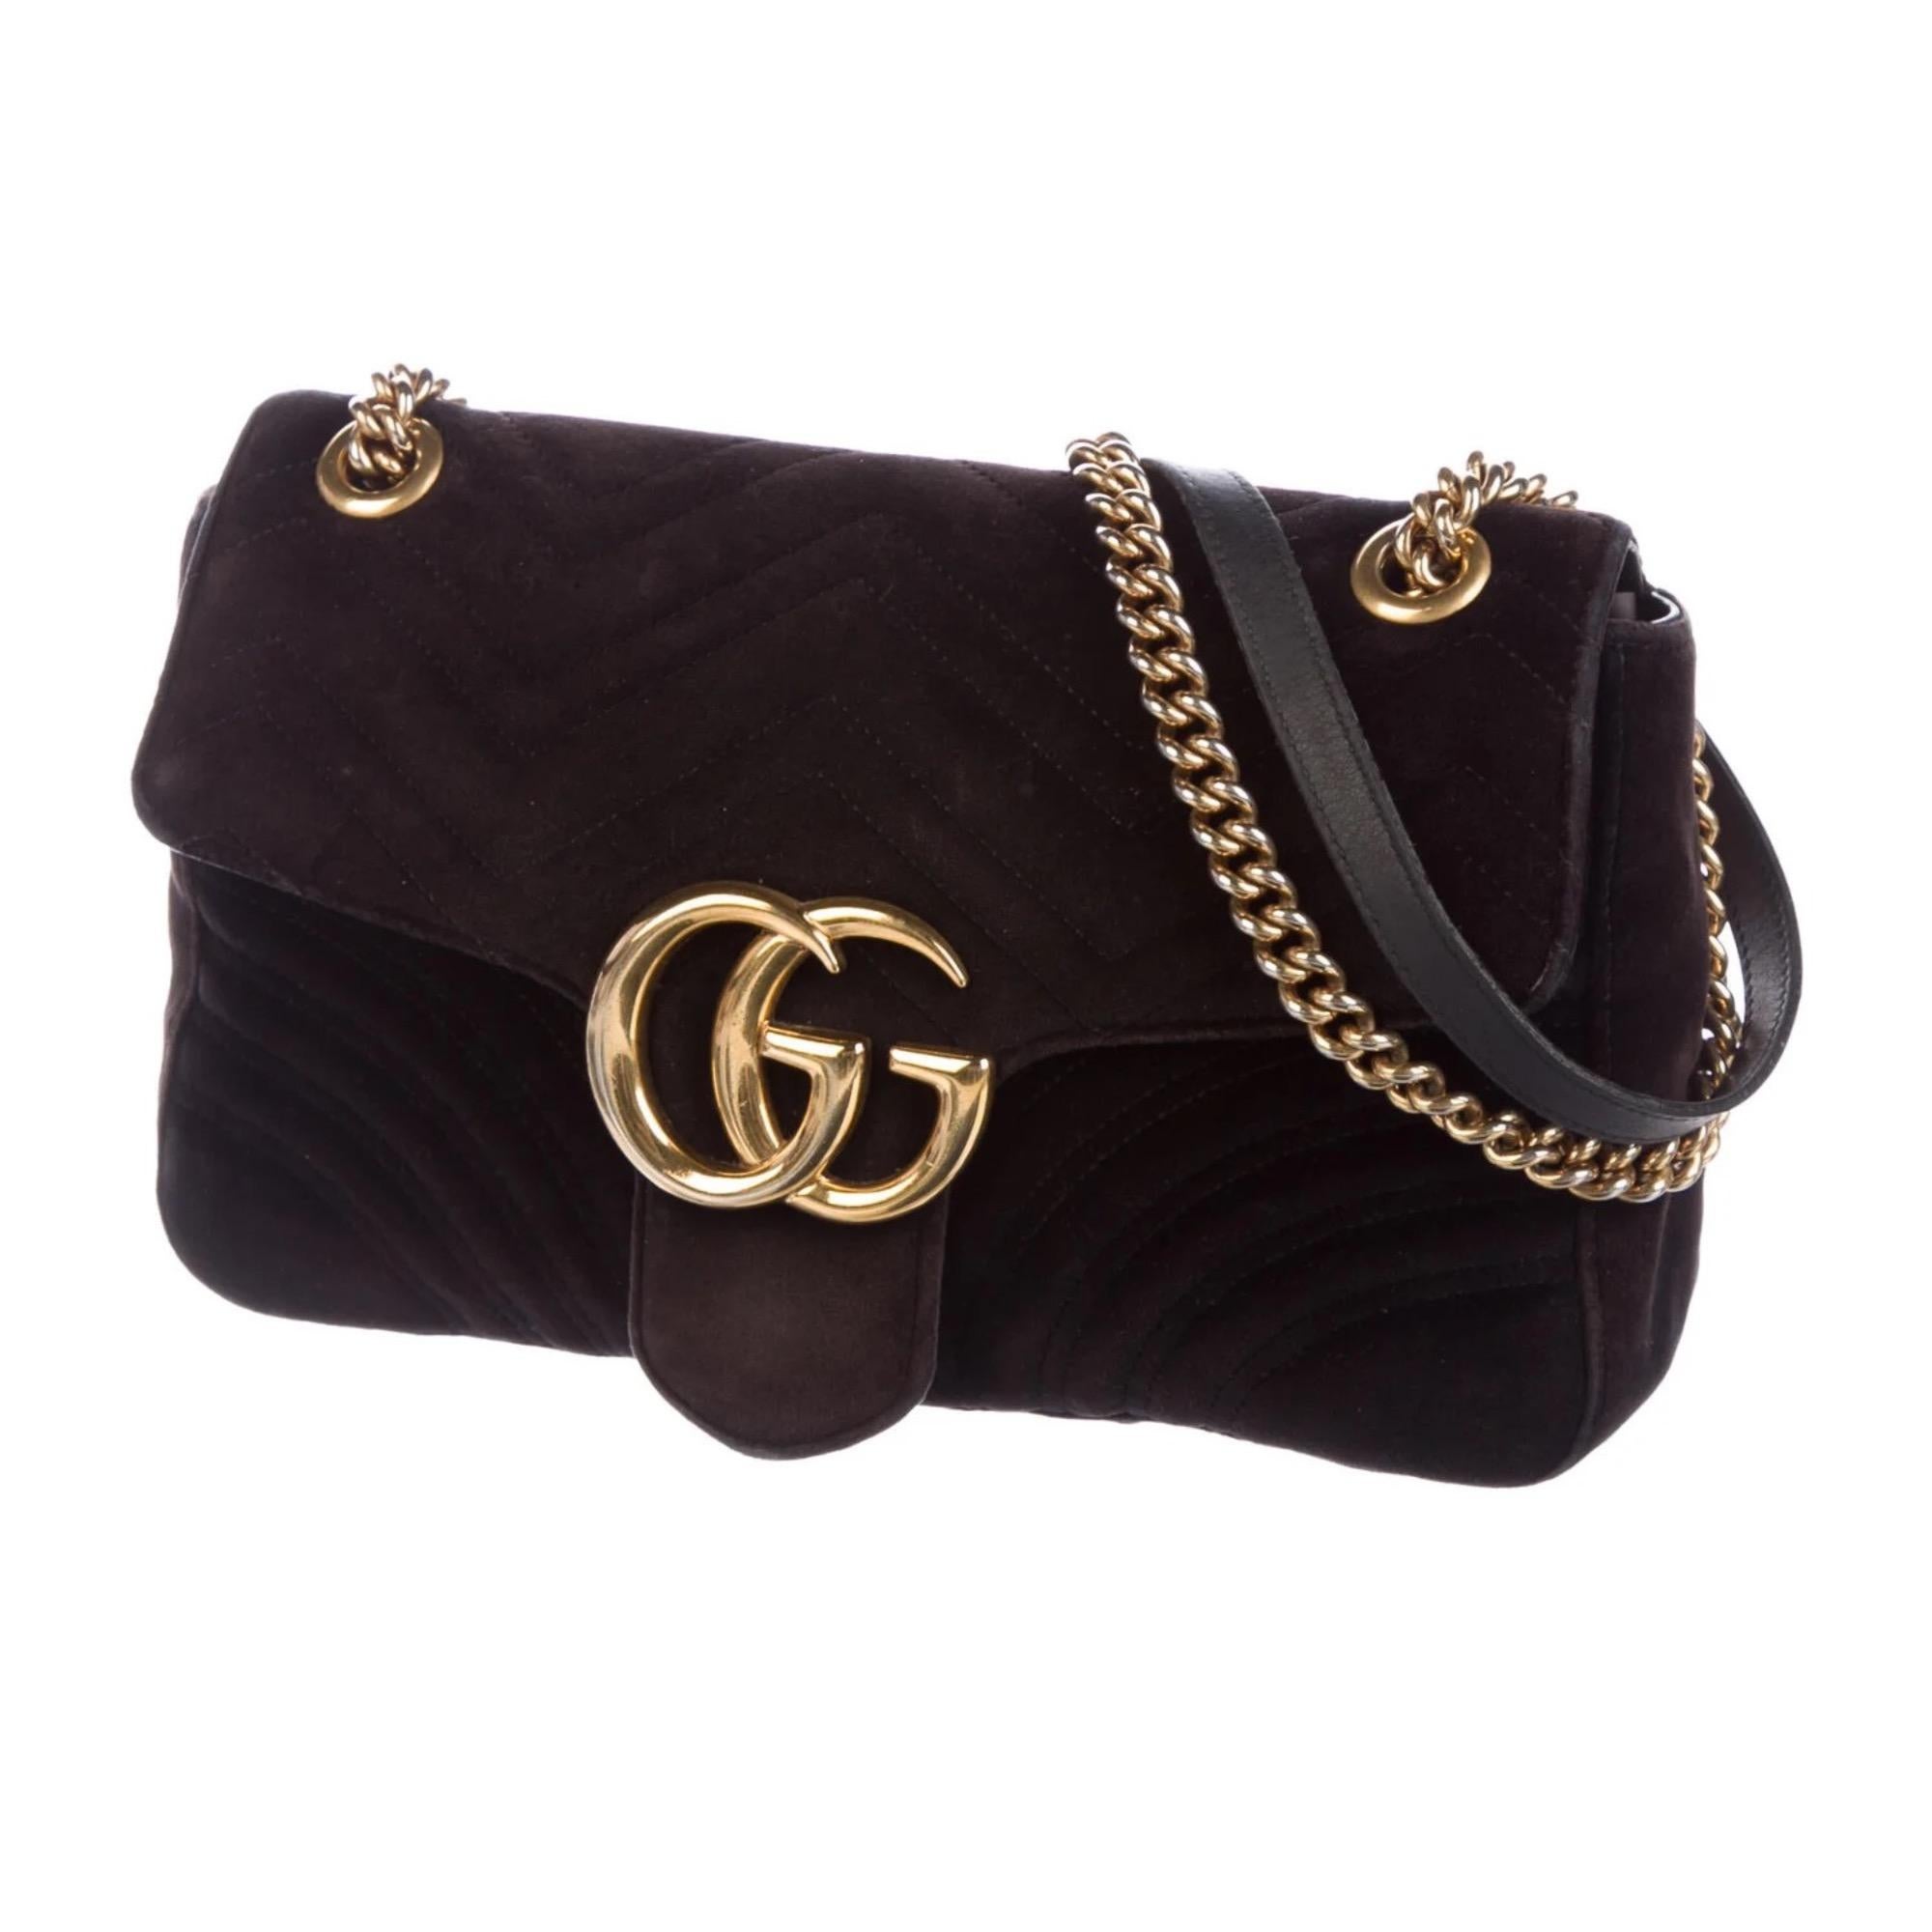 This shoulder bag is made of soft velvet in black with matelassé stitching. This bag features a long gold chain-link shoulder strap with a leather shoulder pad, a front flap with the interlocking GG logo and push-lock closure. The interior is